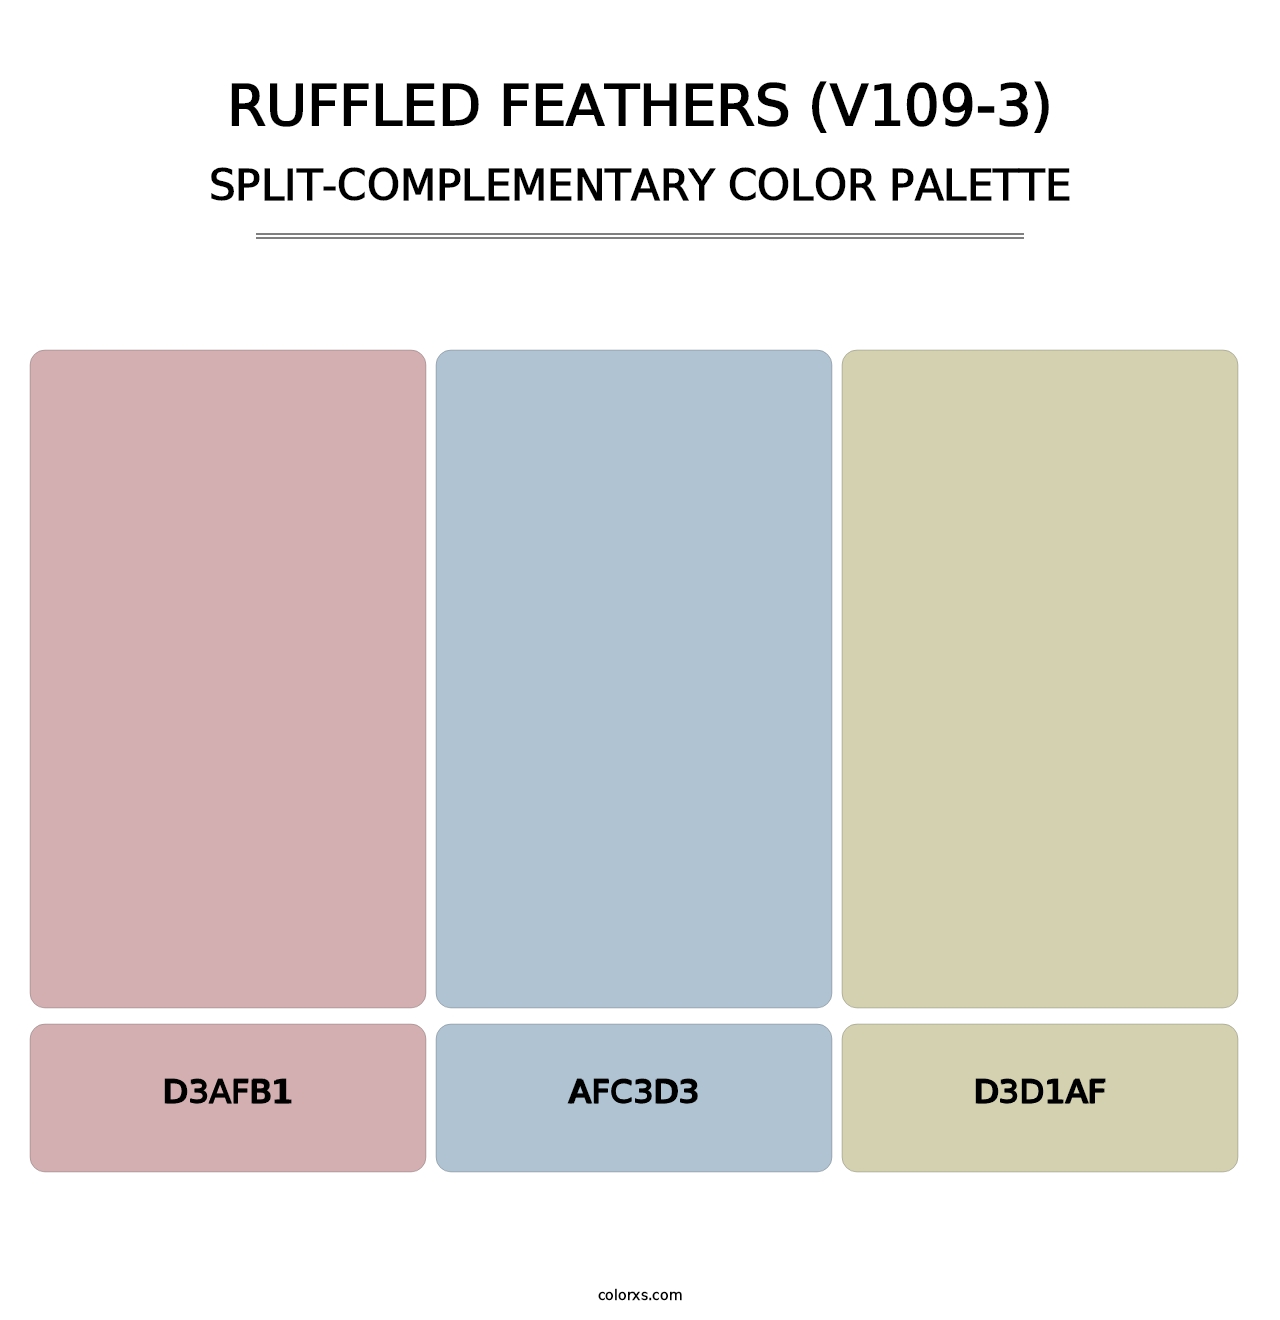 Ruffled Feathers (V109-3) - Split-Complementary Color Palette